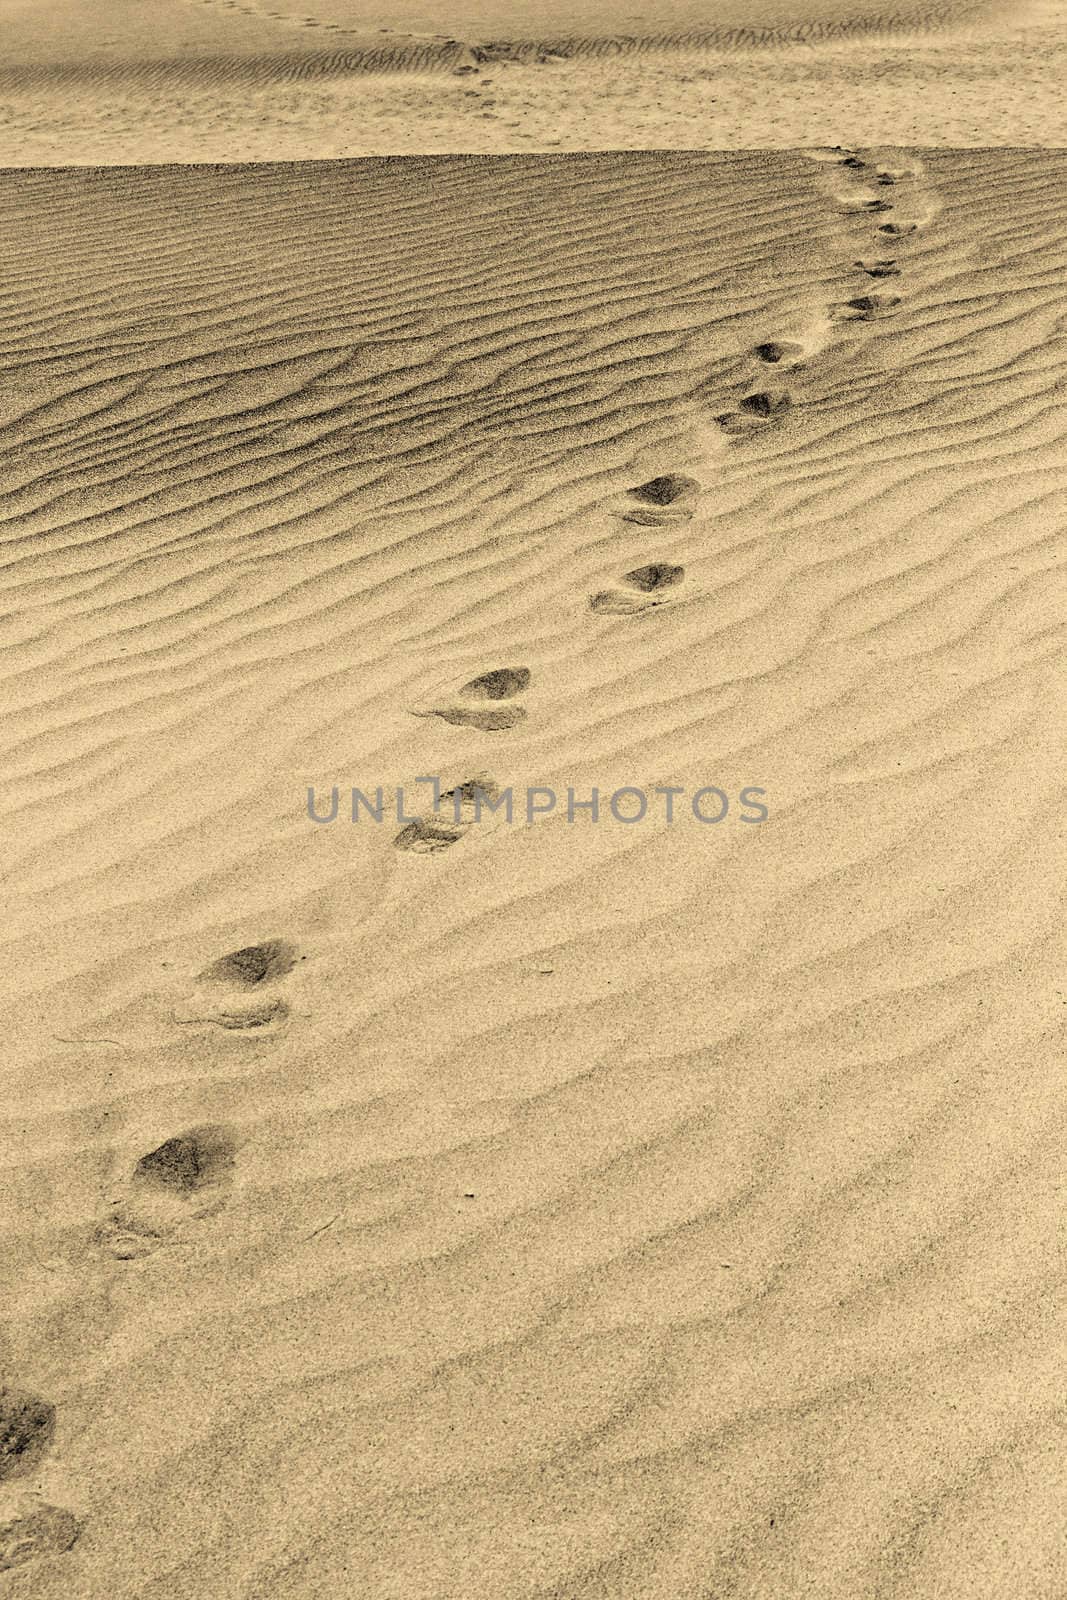 black and white marks on the sand as the background